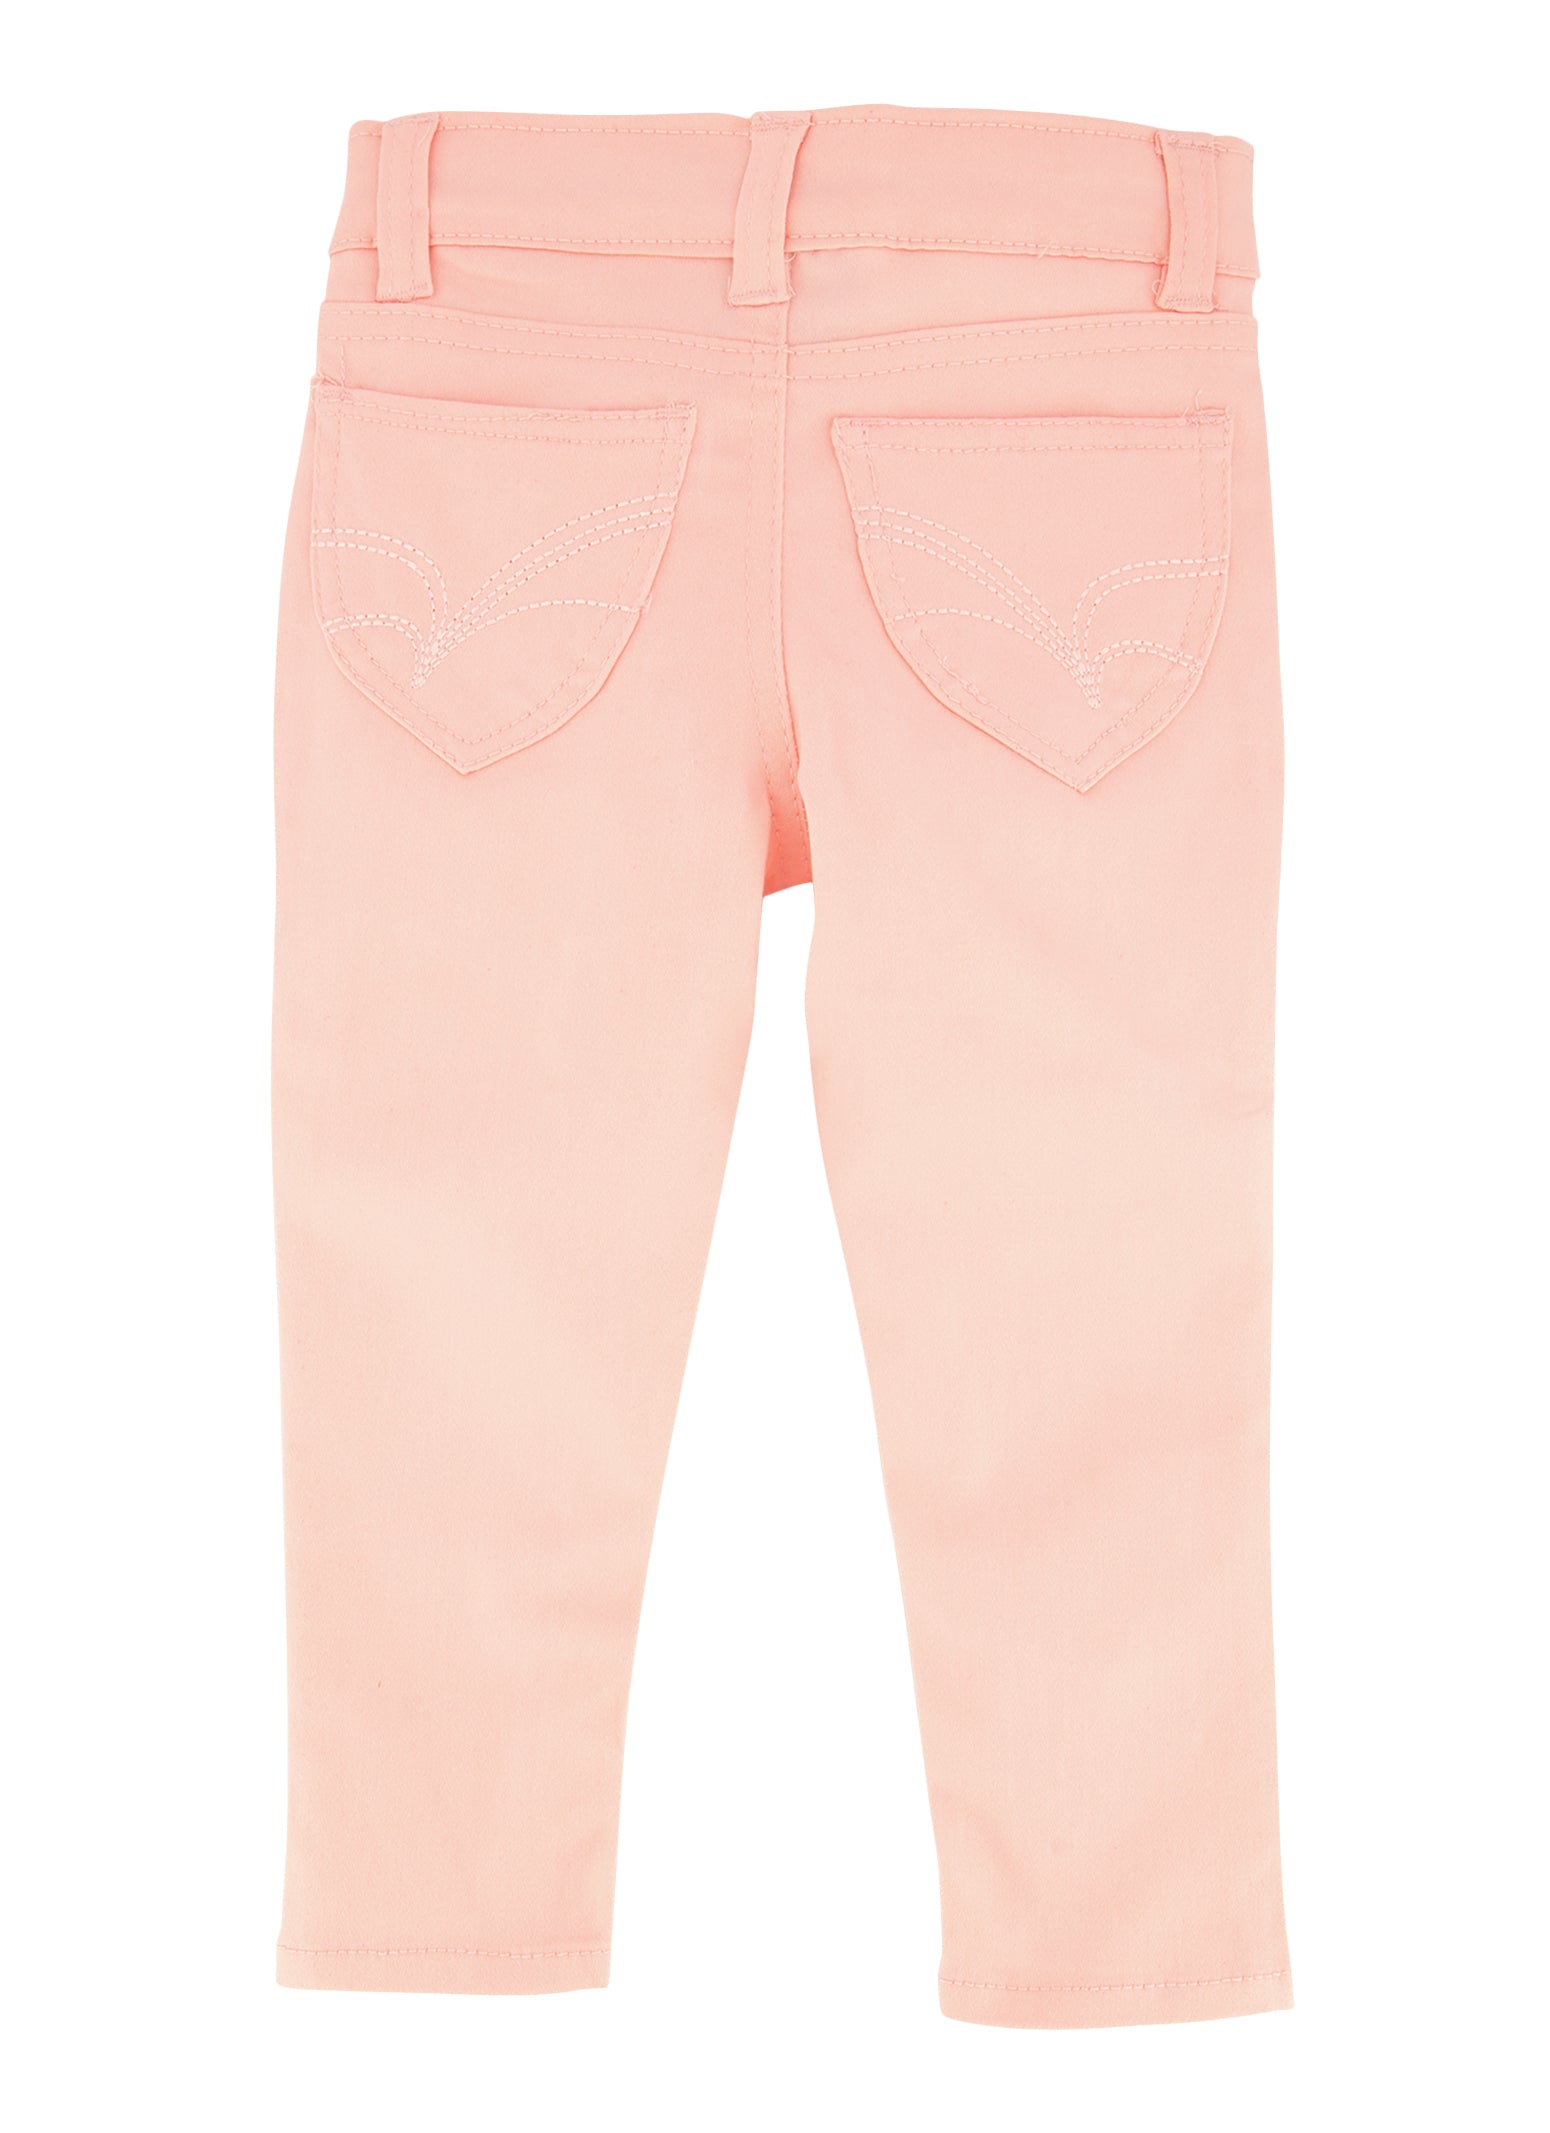 Toddler Girls Solid Twill Pants